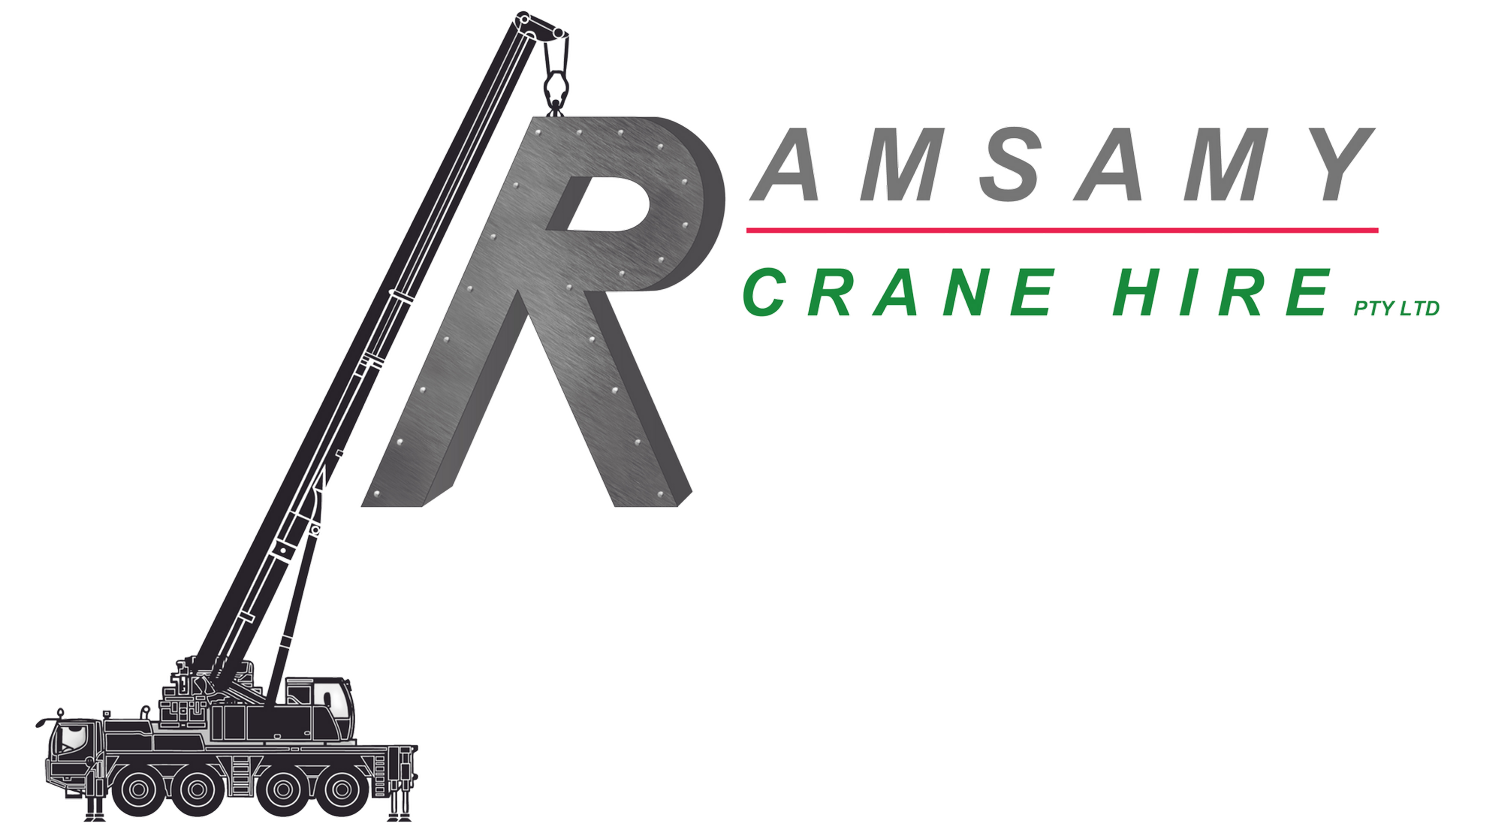 Ramsamy Crane Hire Mackay - Locally Owned and Operated since 1981